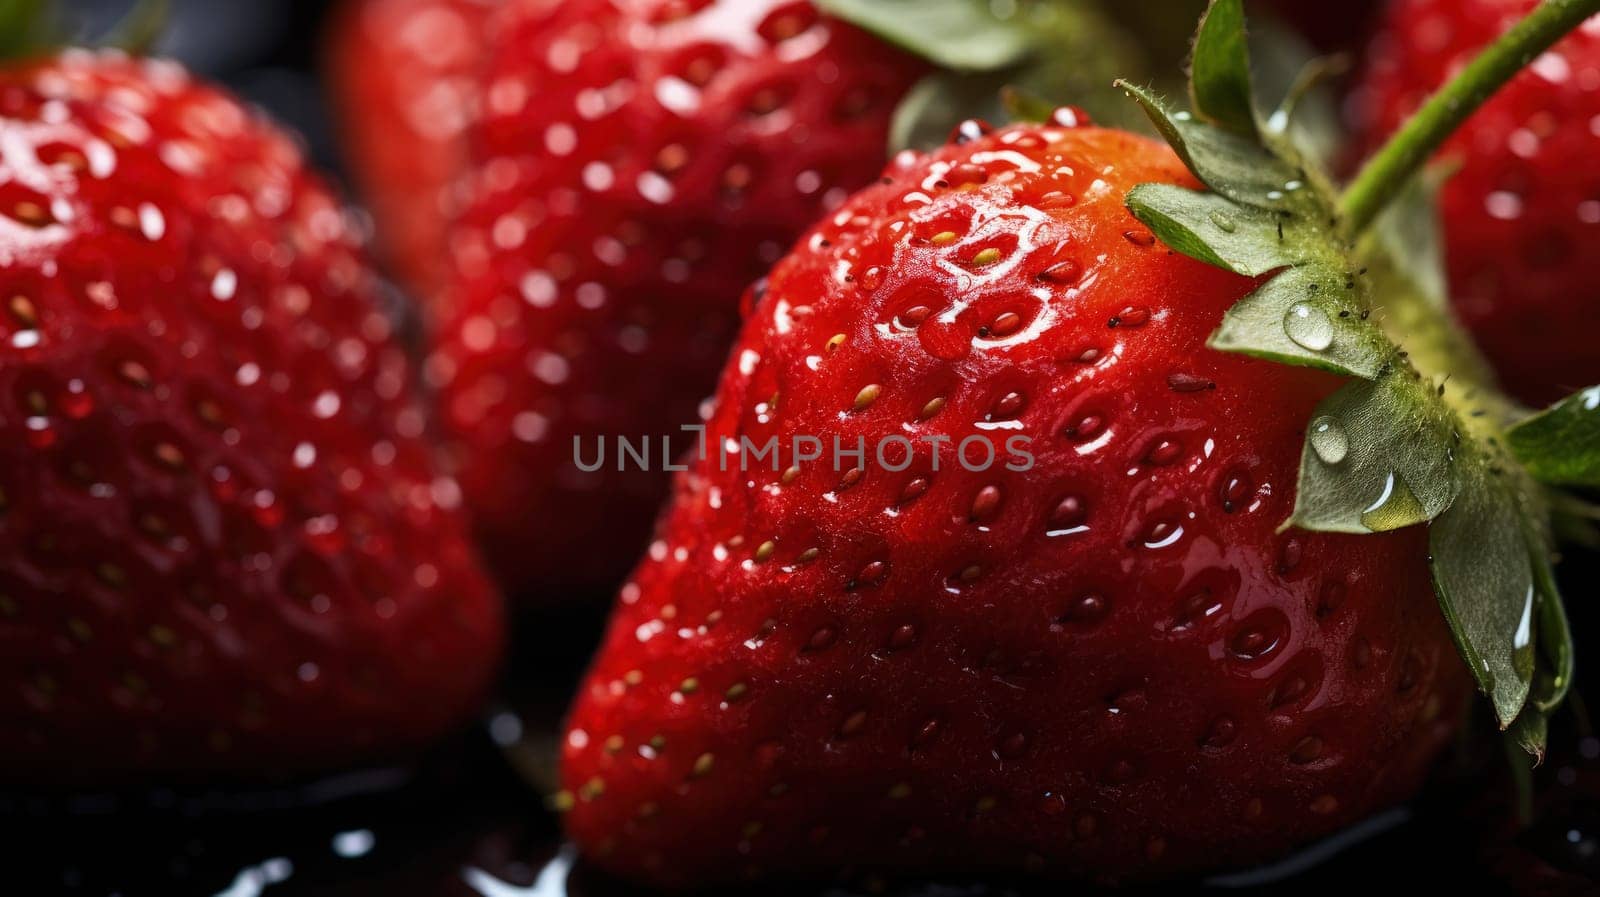 Group of ripe strawberries nestled in a vintage wooden basket, capturing a luscious red tones and the glistening droplets of water on their surface